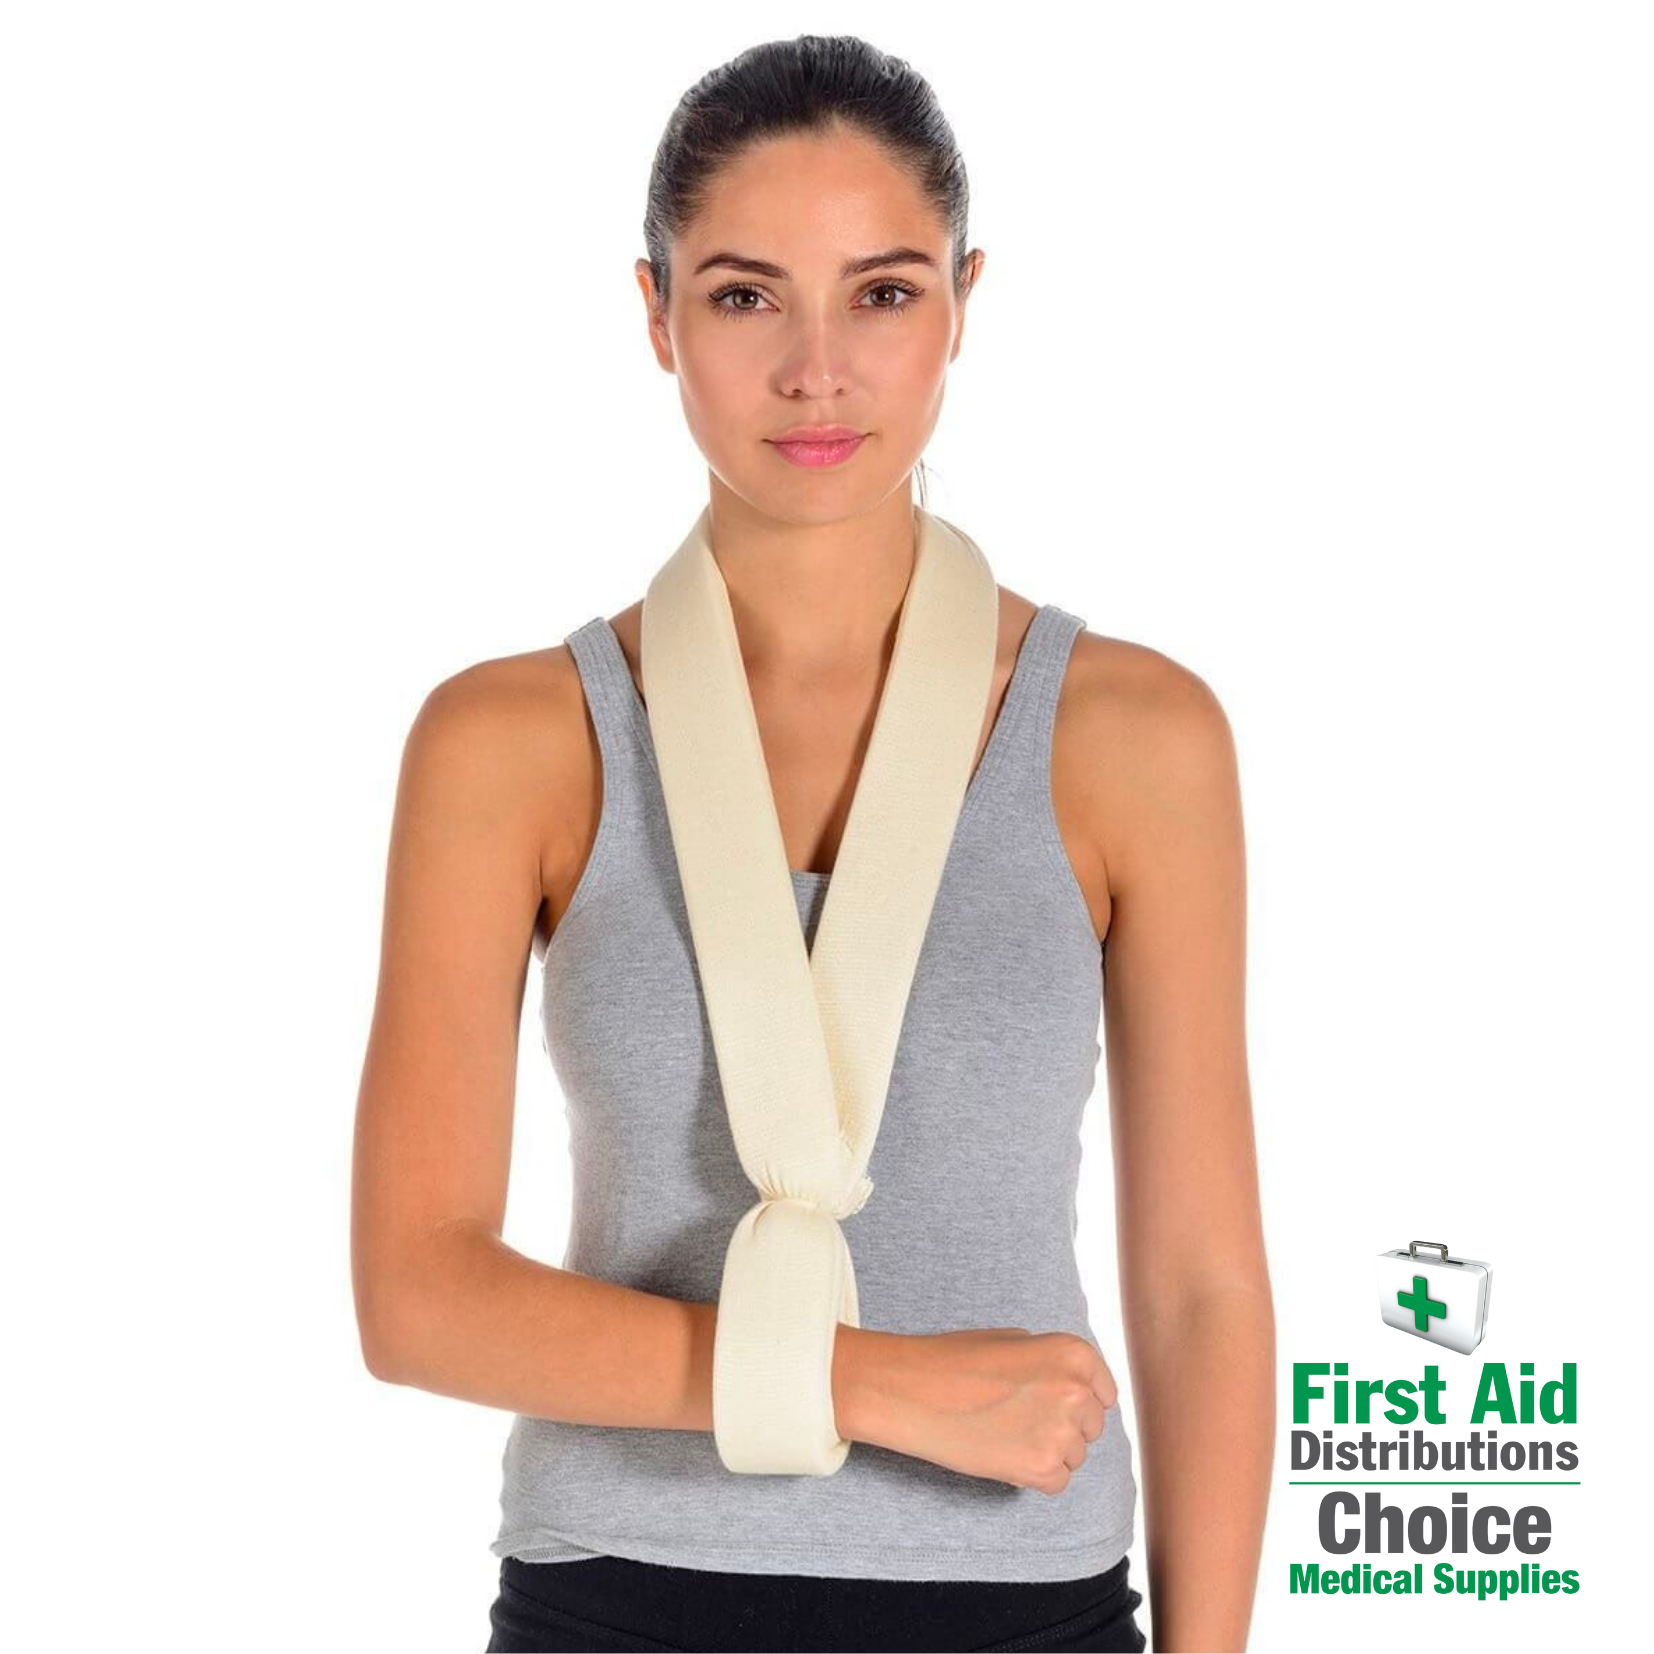 collections/CollarForm_Sling_First_Aid_Distributions_1.png